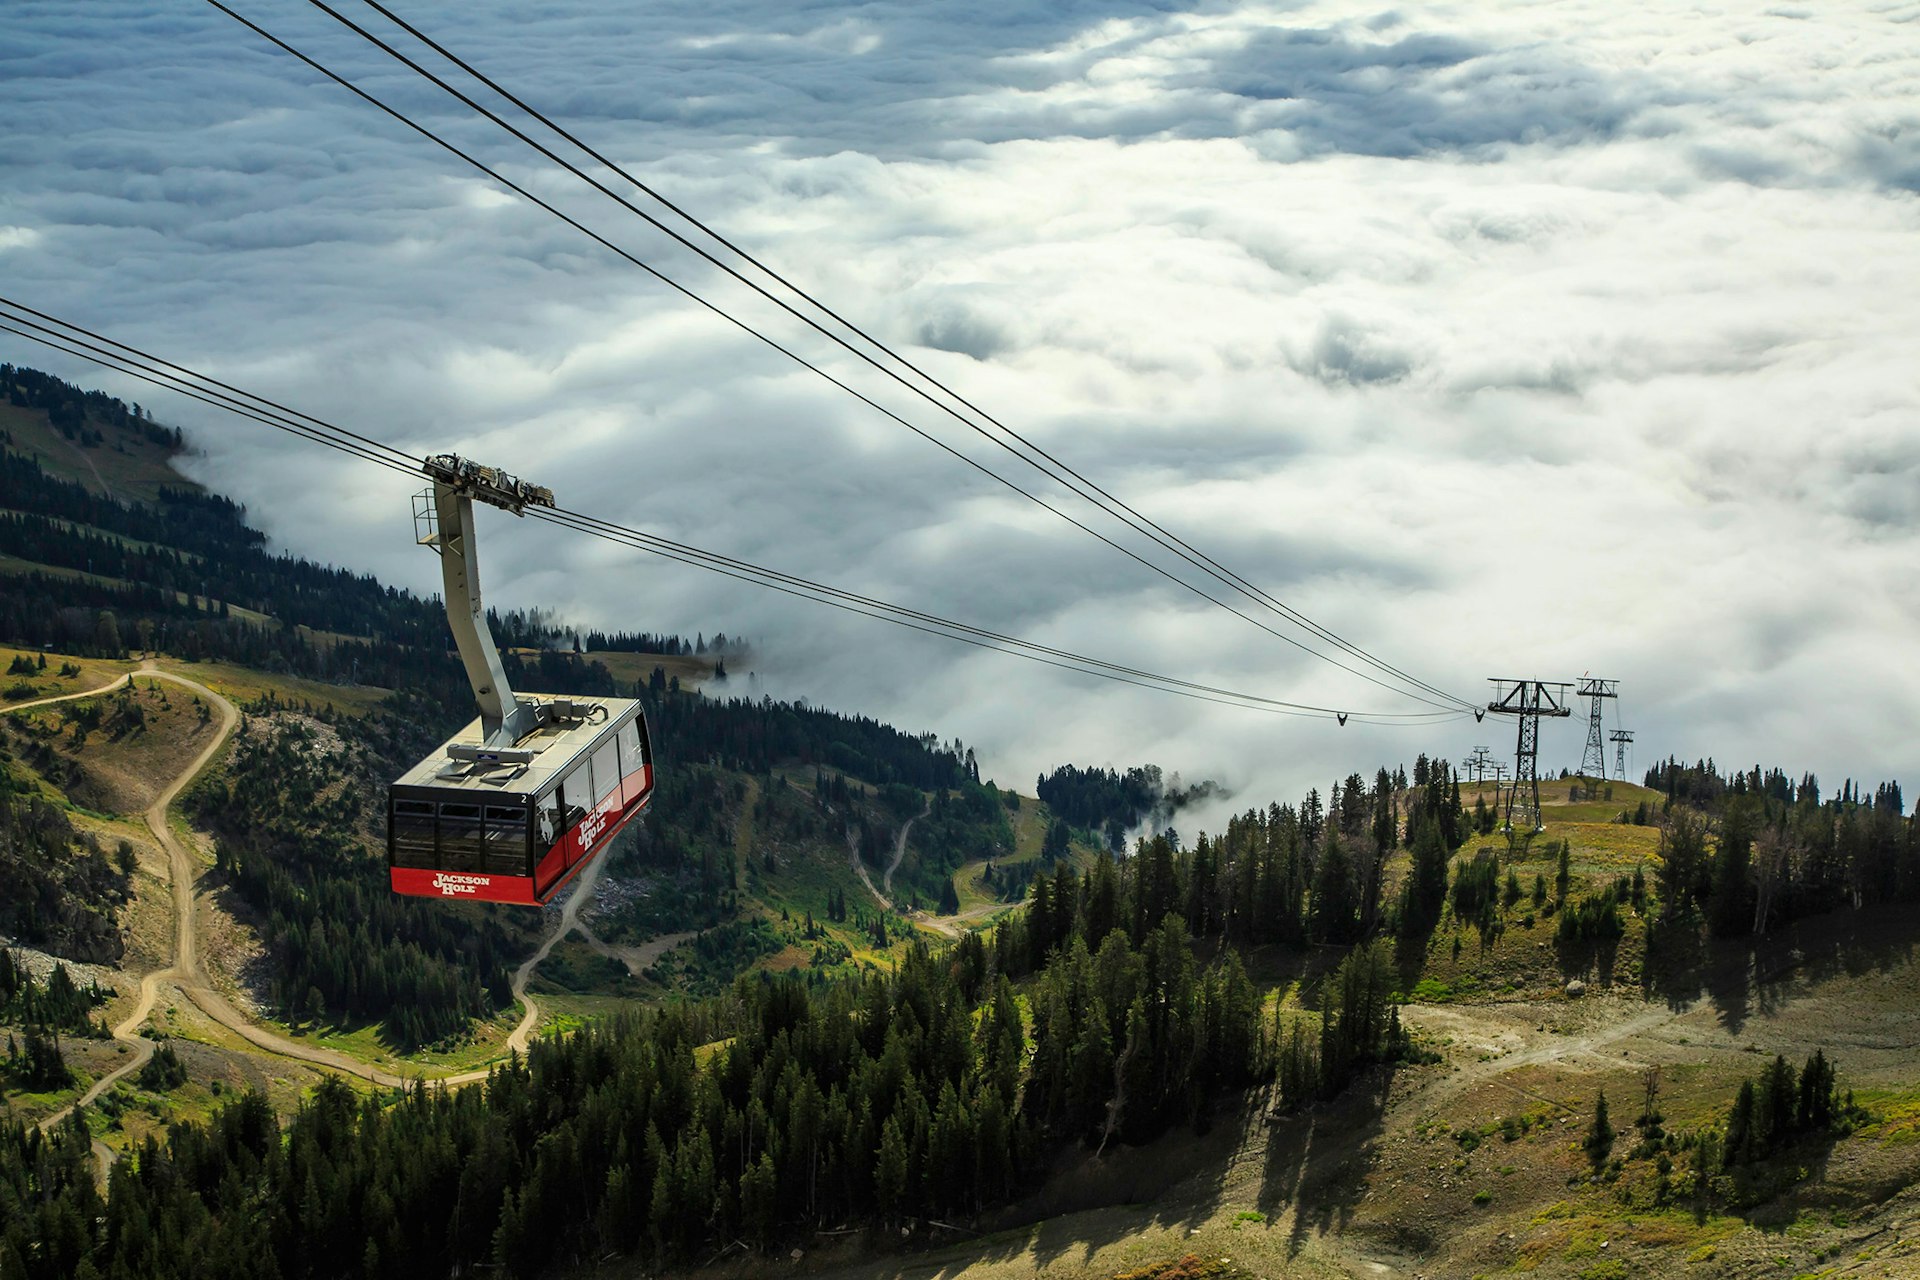 The Aerial Tram flying high above the clouds in summer